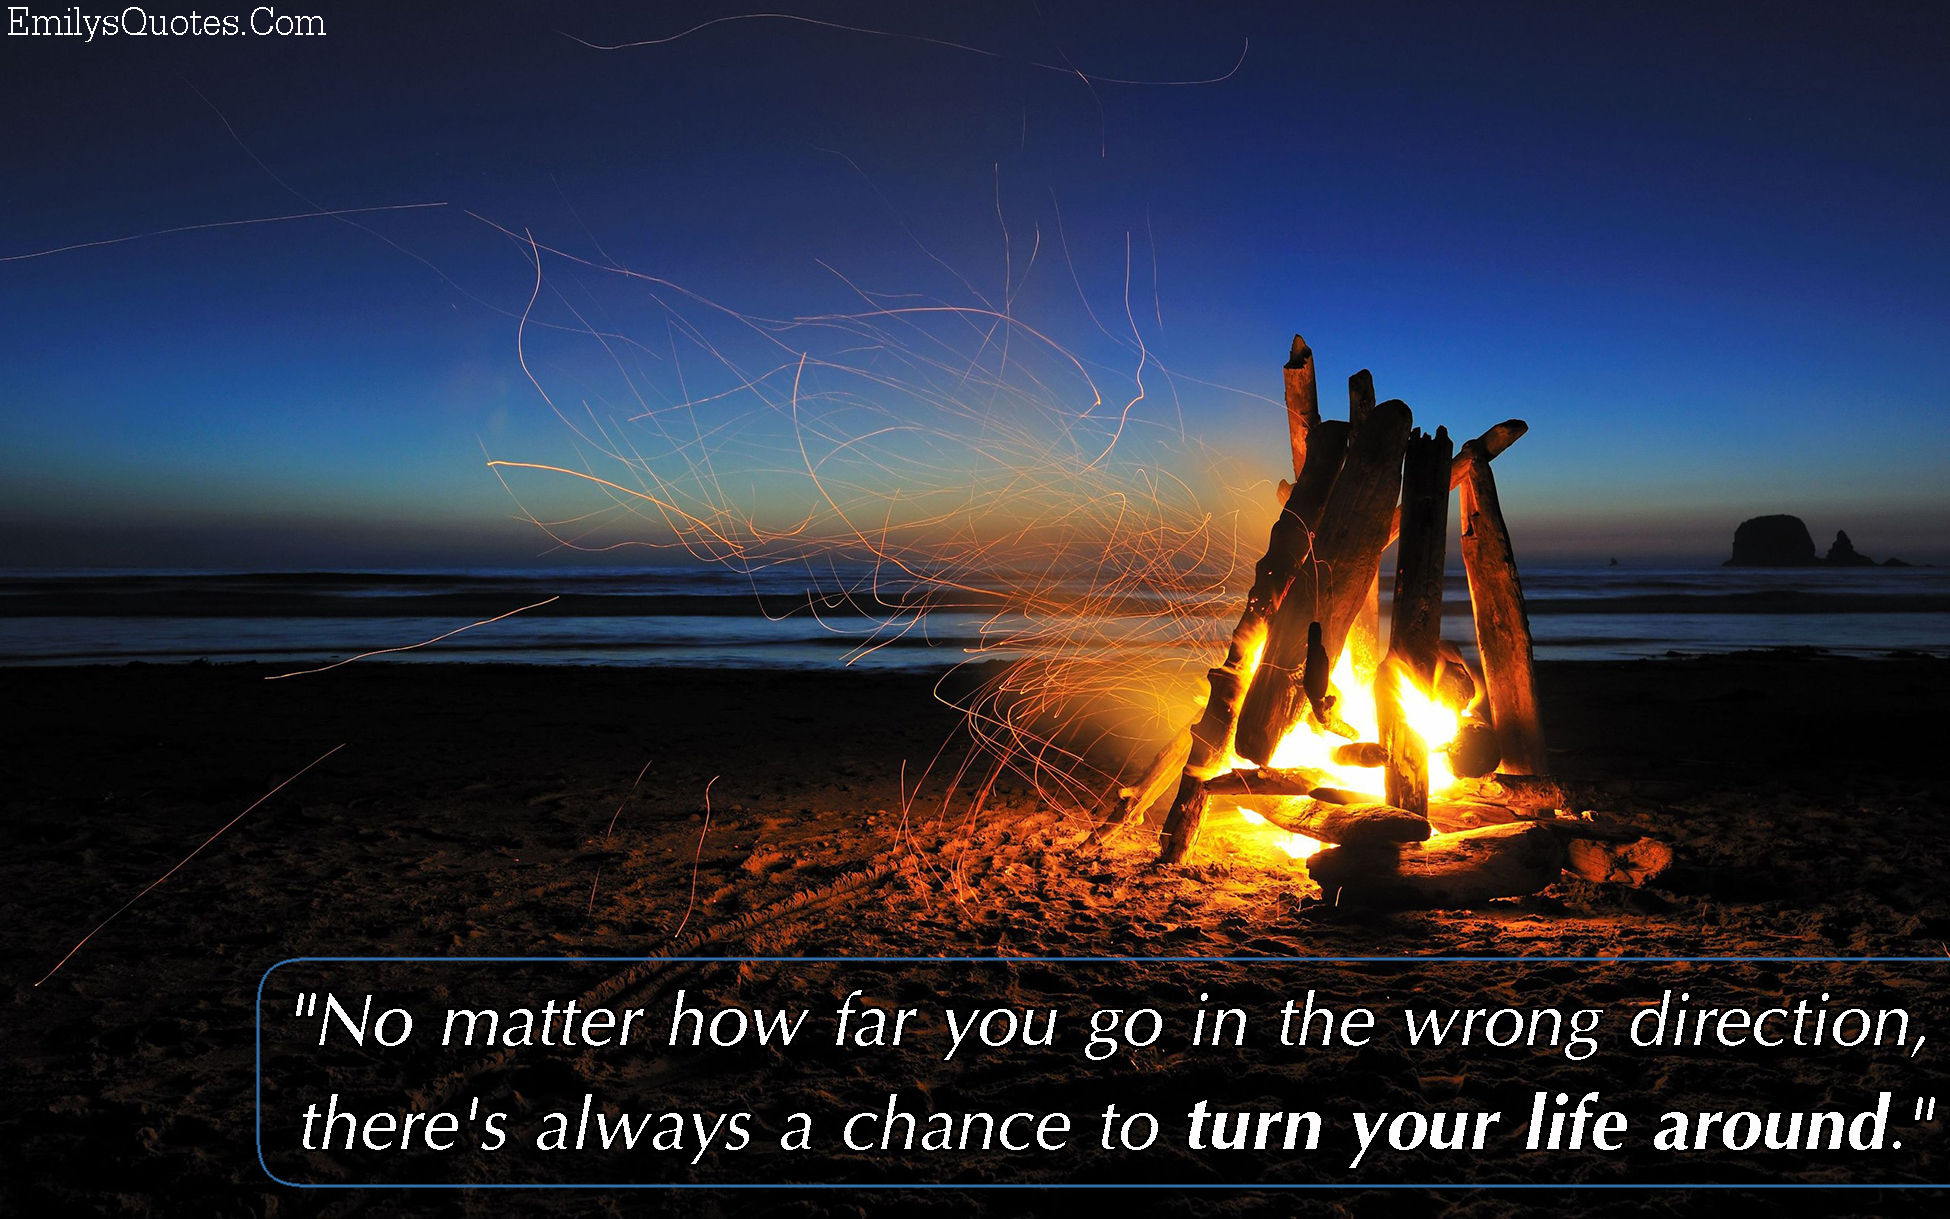 No matter how far you go in the wrong direction, there’s always a chance to turn your life around